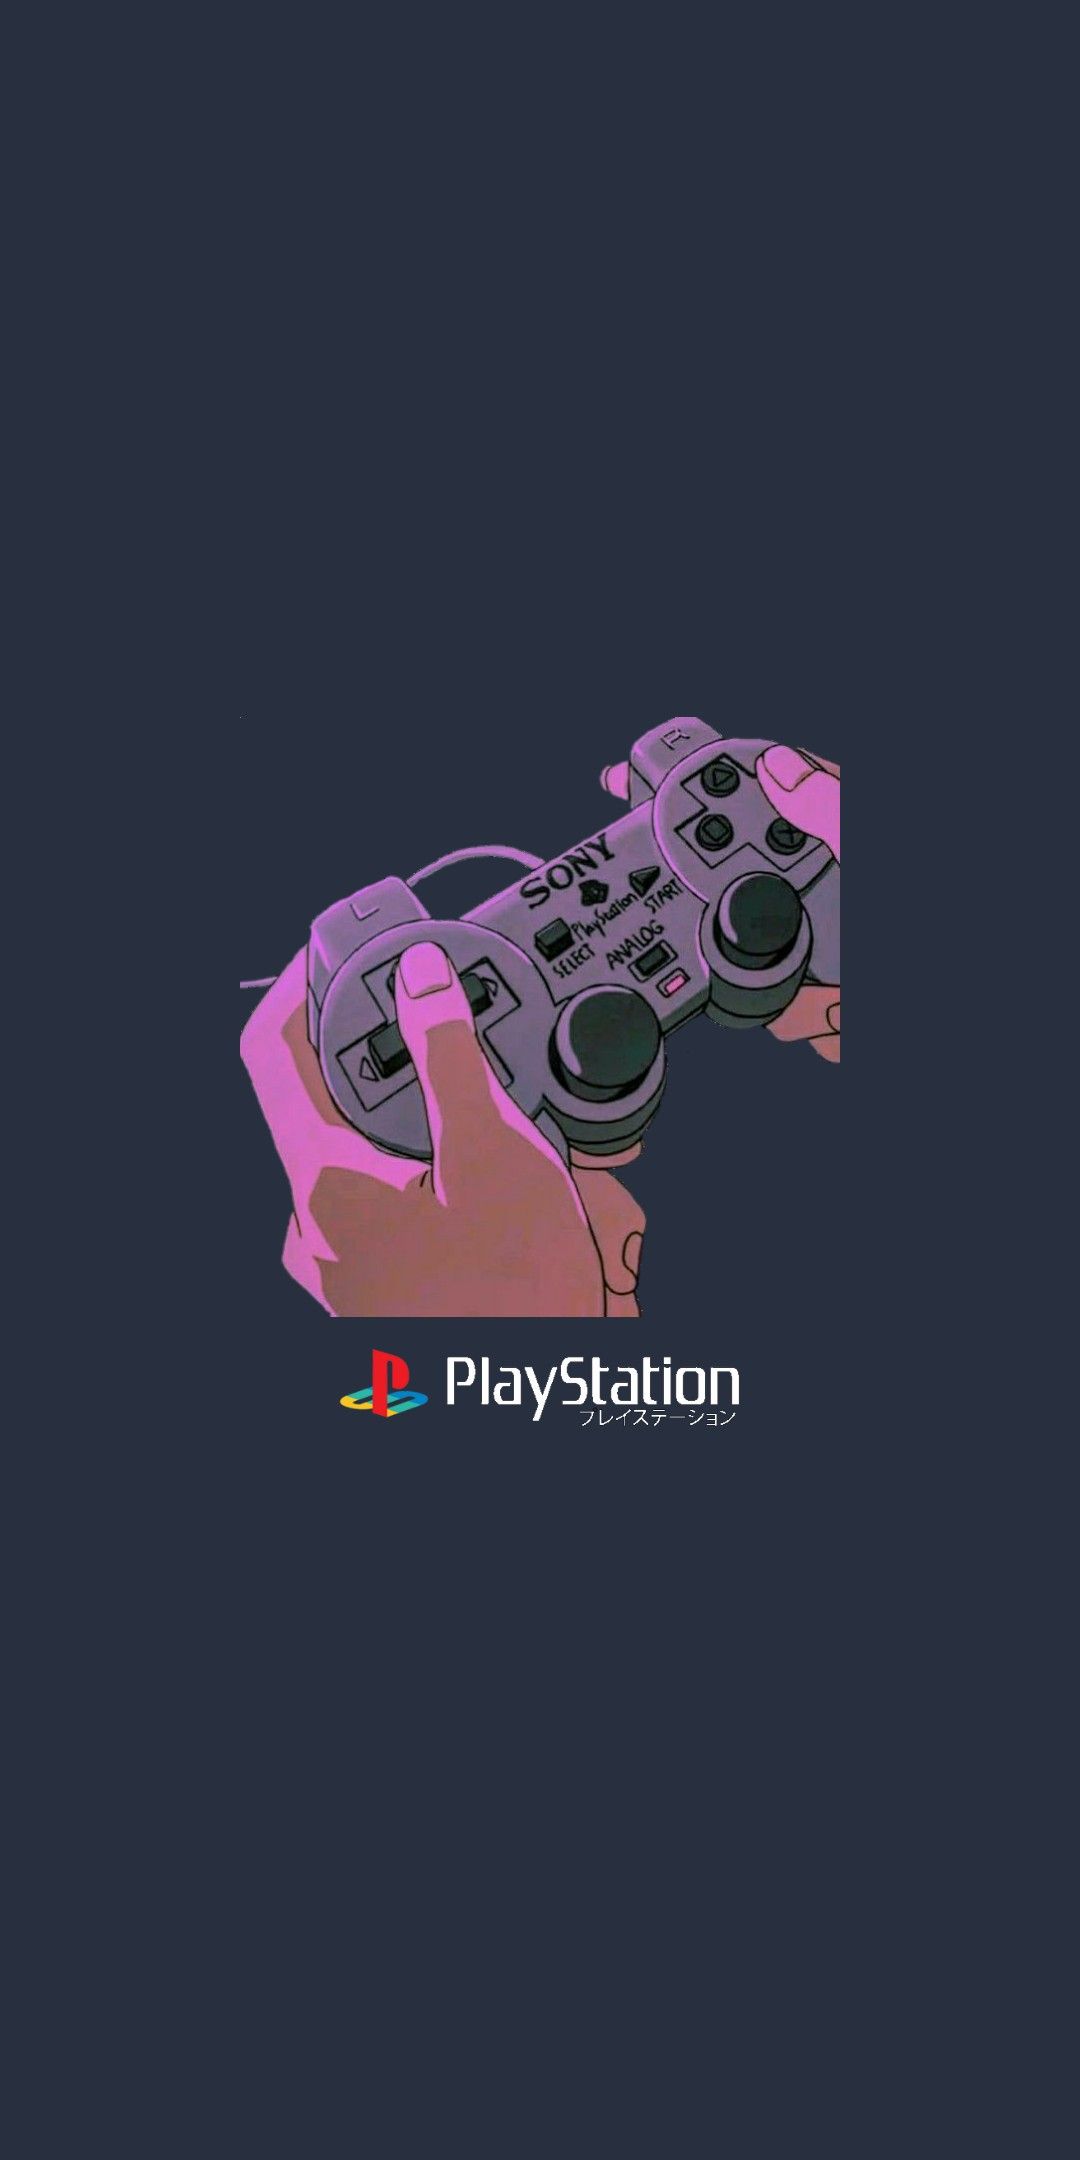 Free download PlayStation aesthetic wallpaper. Japanese wallpaper iphone, Cute anime wallpaper, Edgy wallpaper